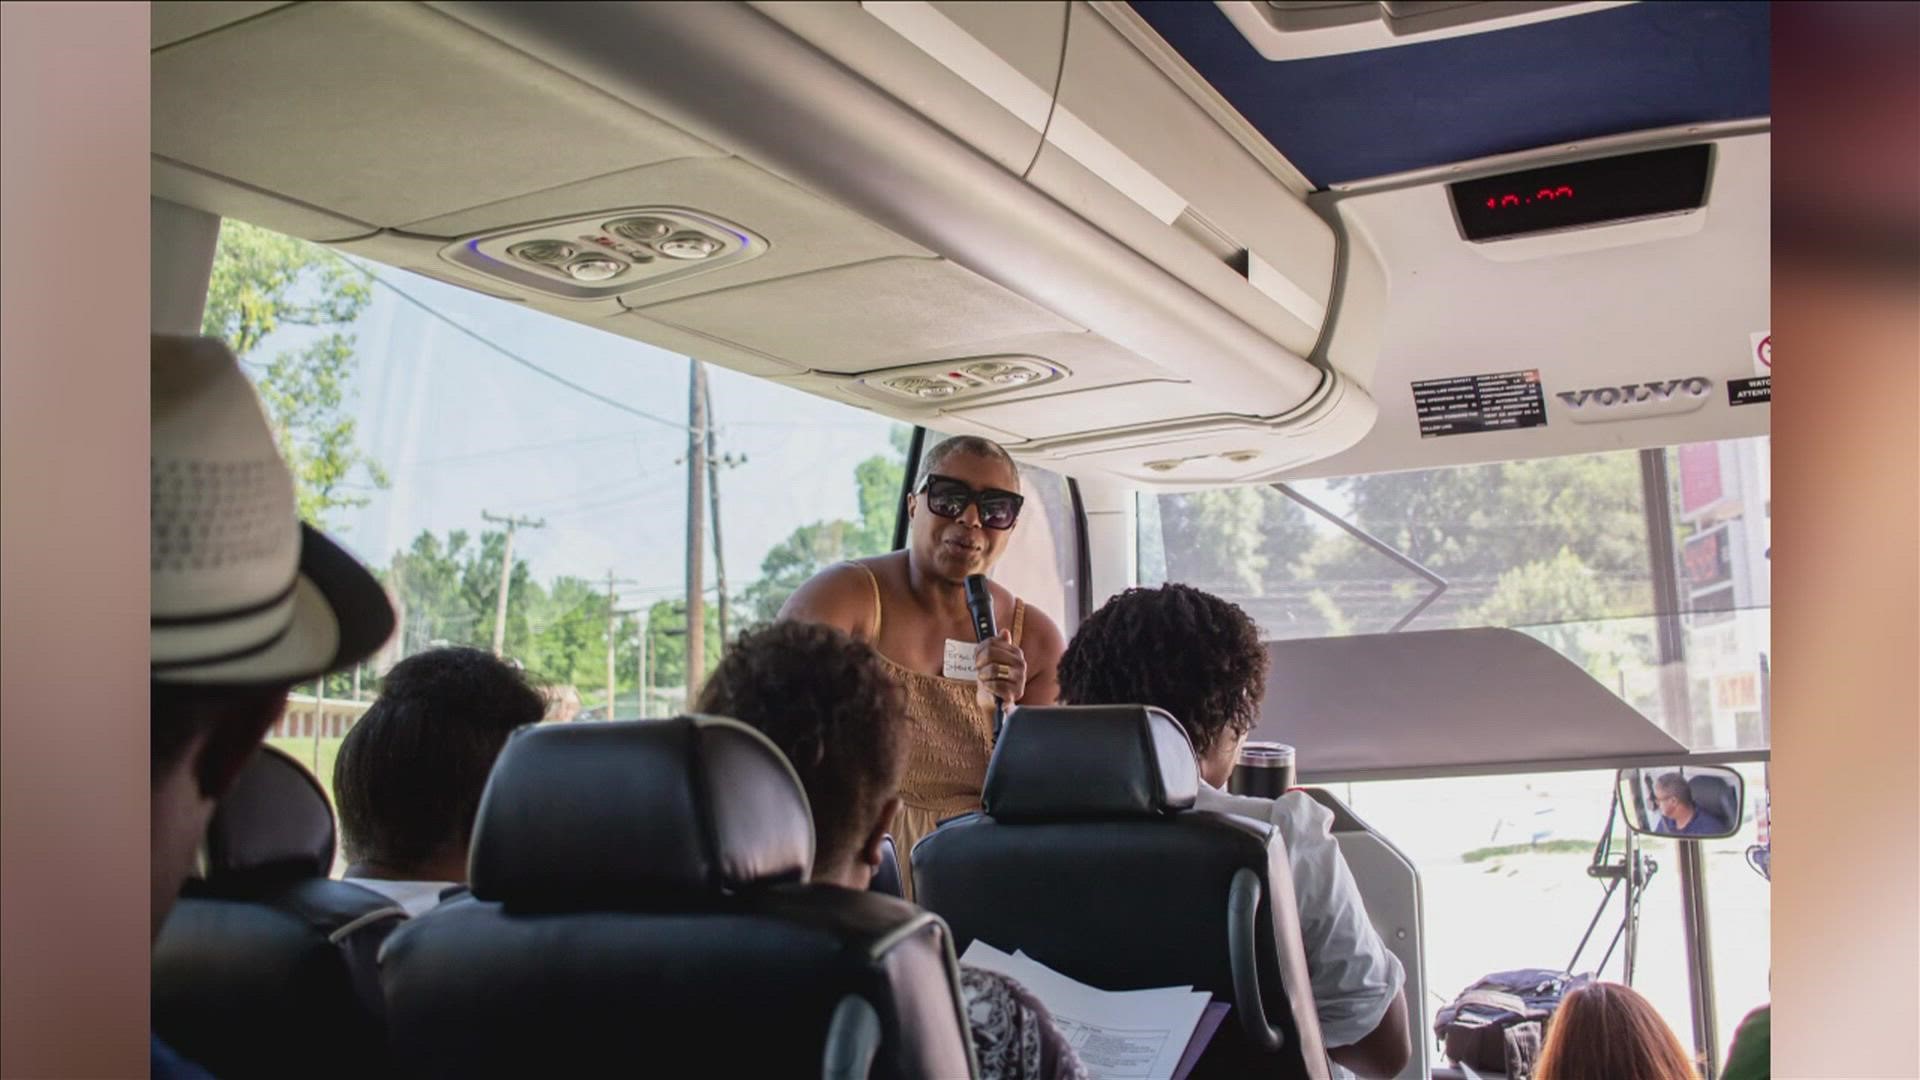 Leaders in the Frayser Community took a tour of Frayser and offered history about the area to the tour group.